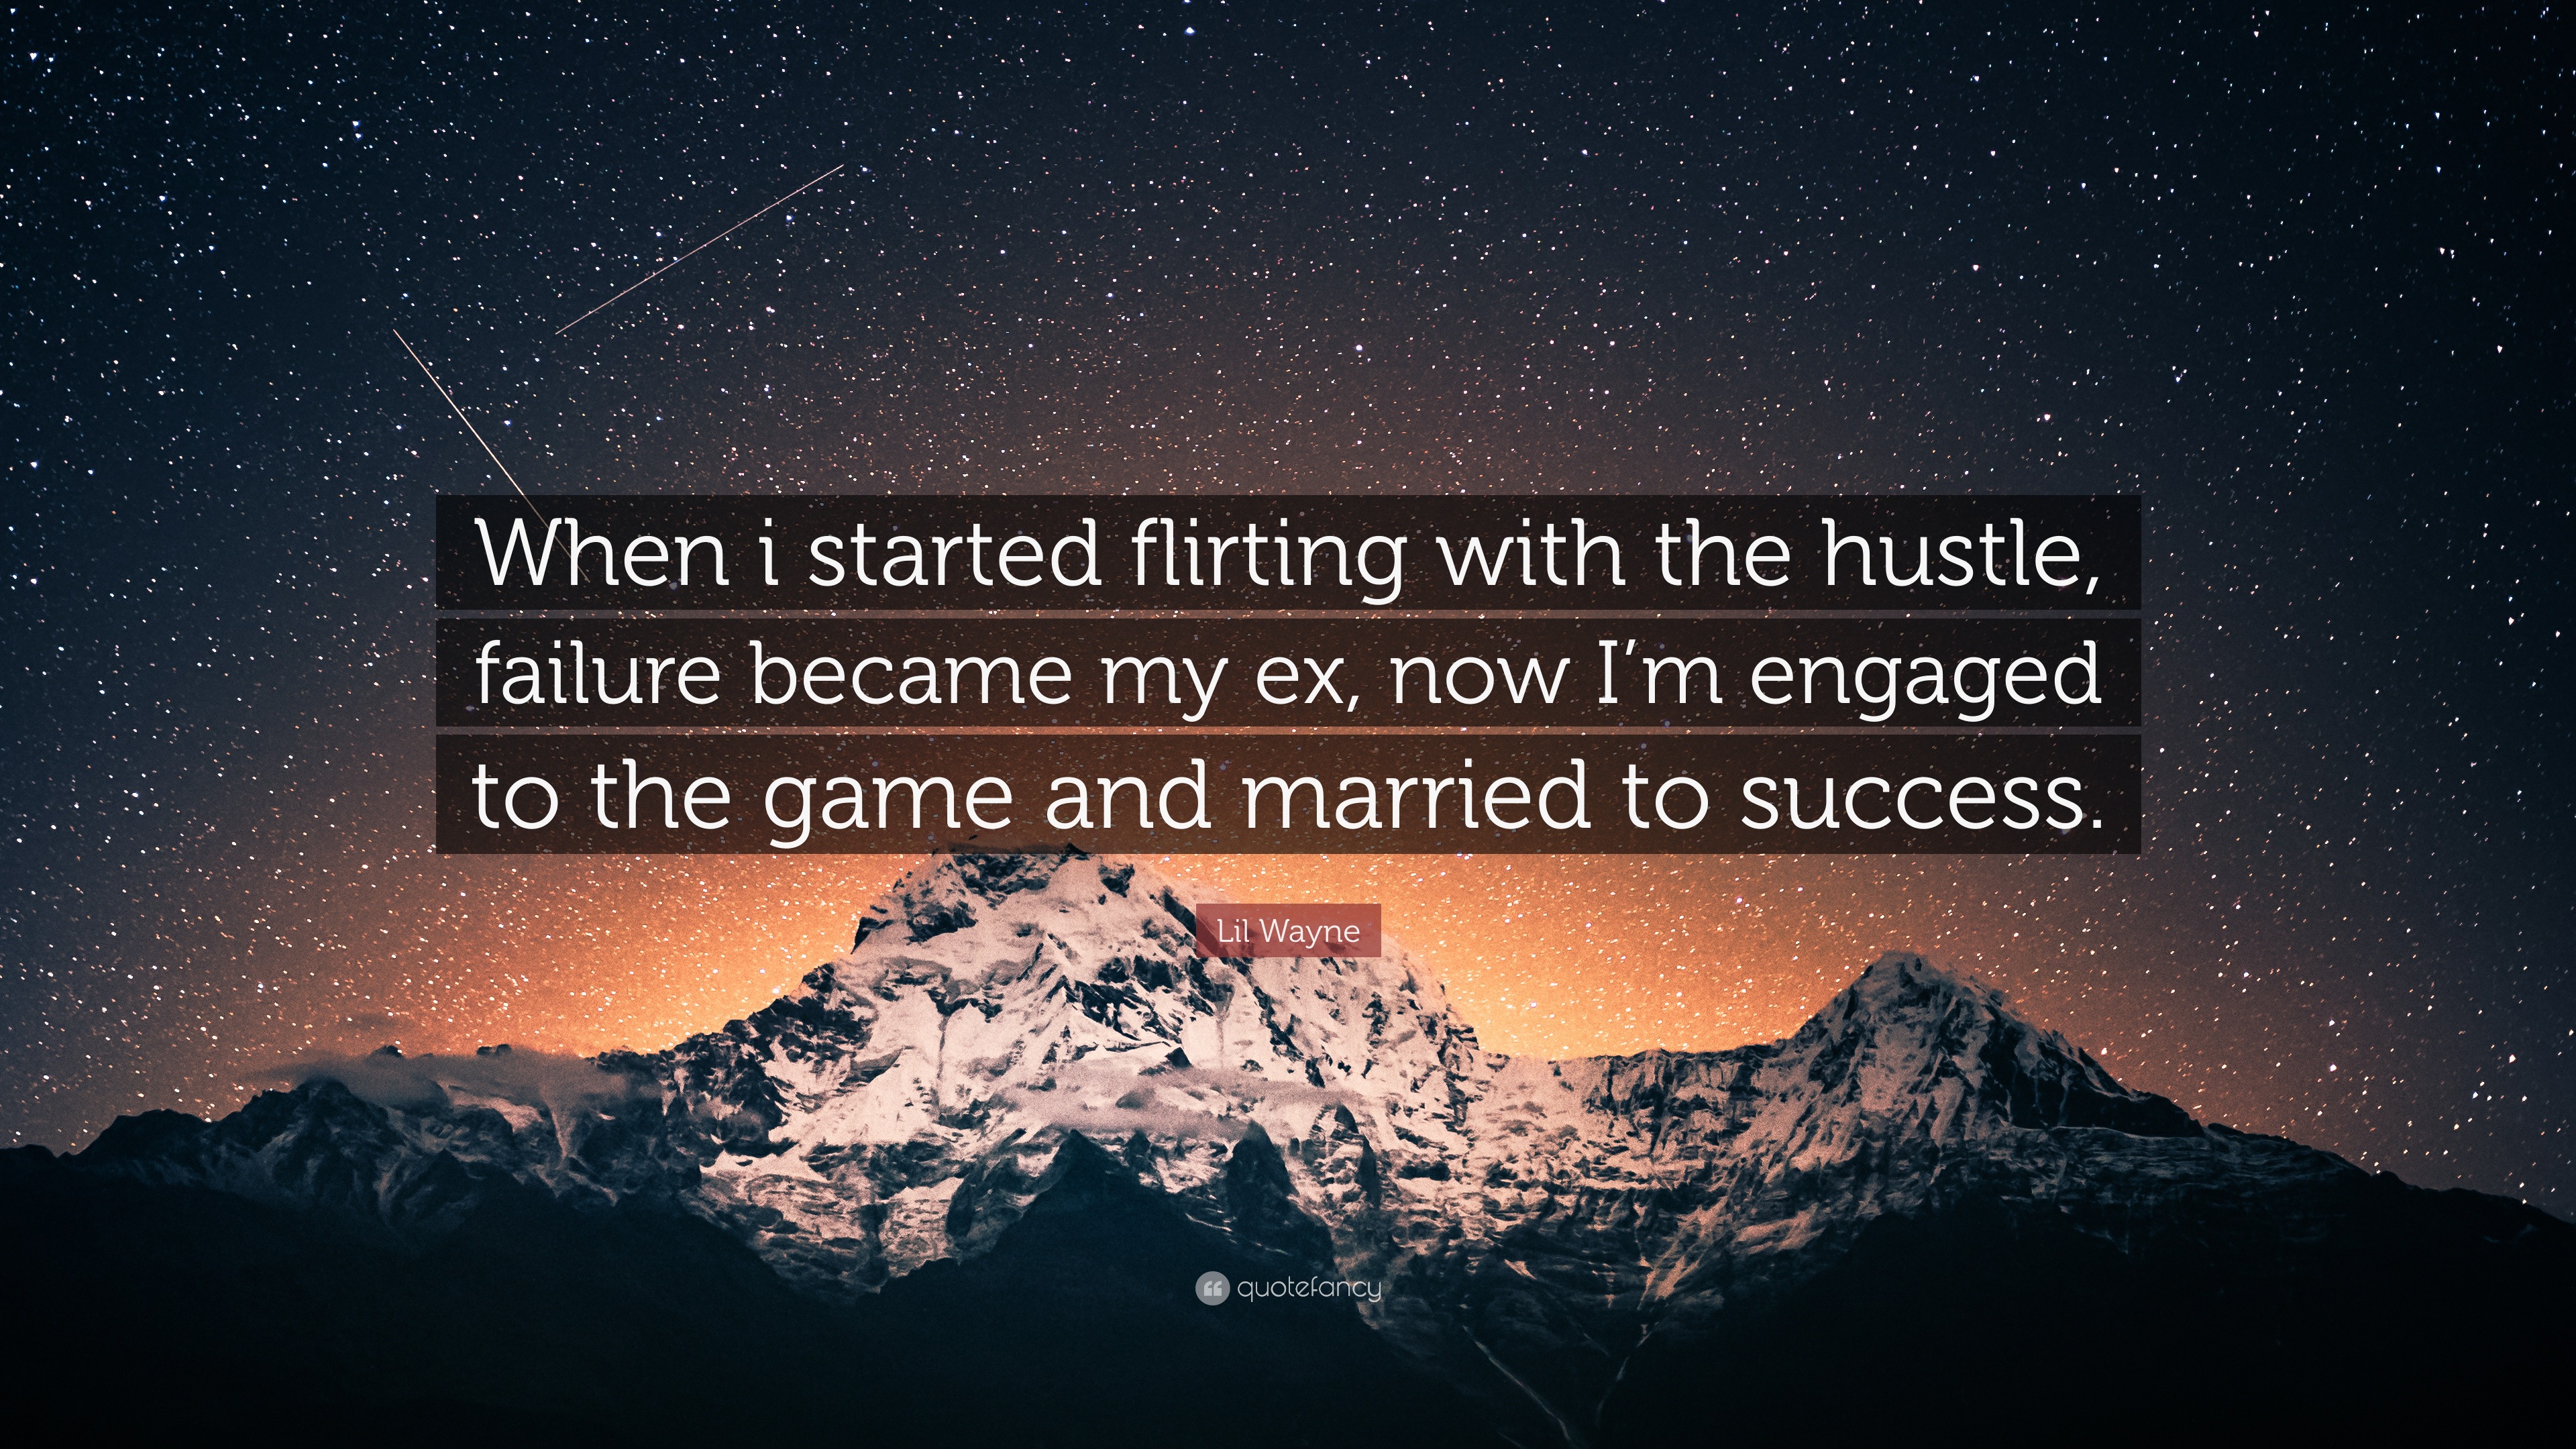 Lil Wayne Quote: “When i started flirting with the hustle, failure became my ex, now ...3840 x 2160